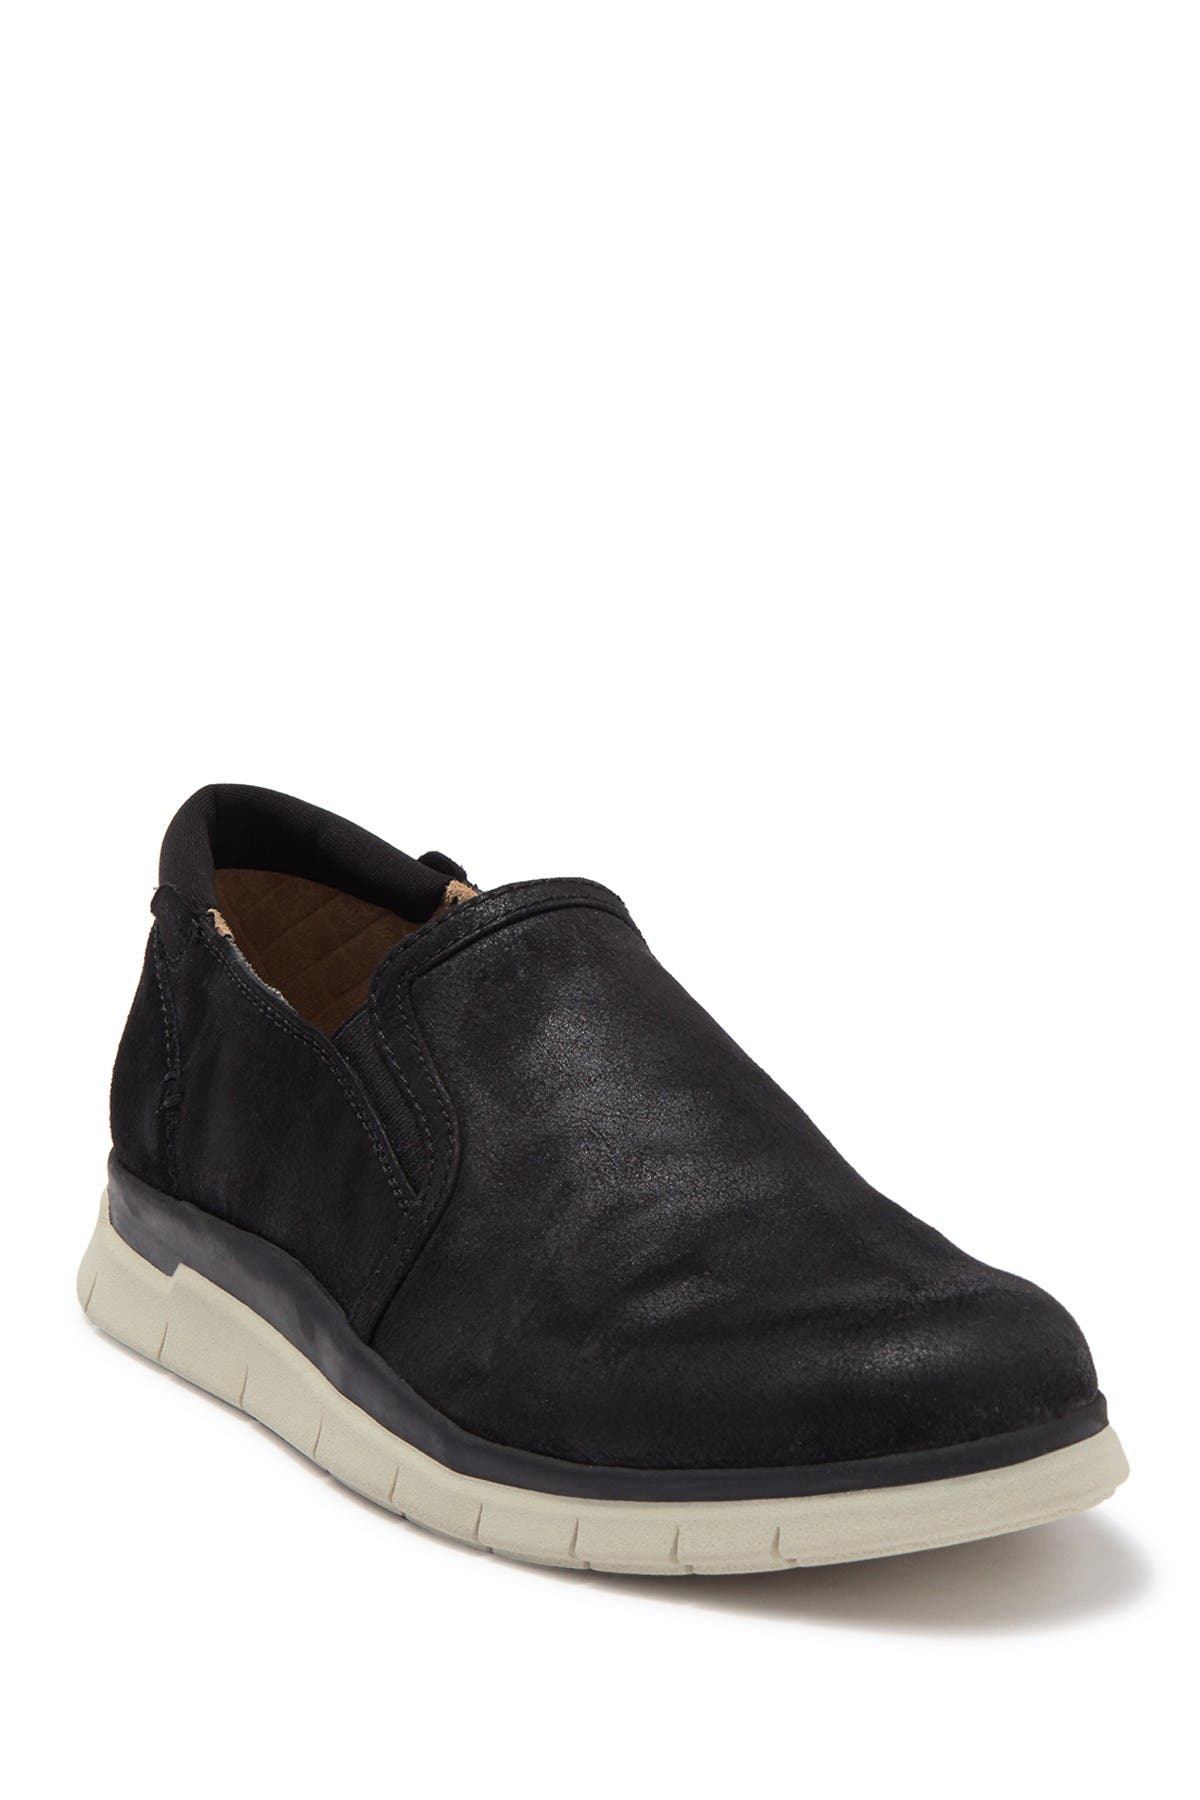 Dr. Scholl's Voyager Slip-on Sneaker In Oxford1